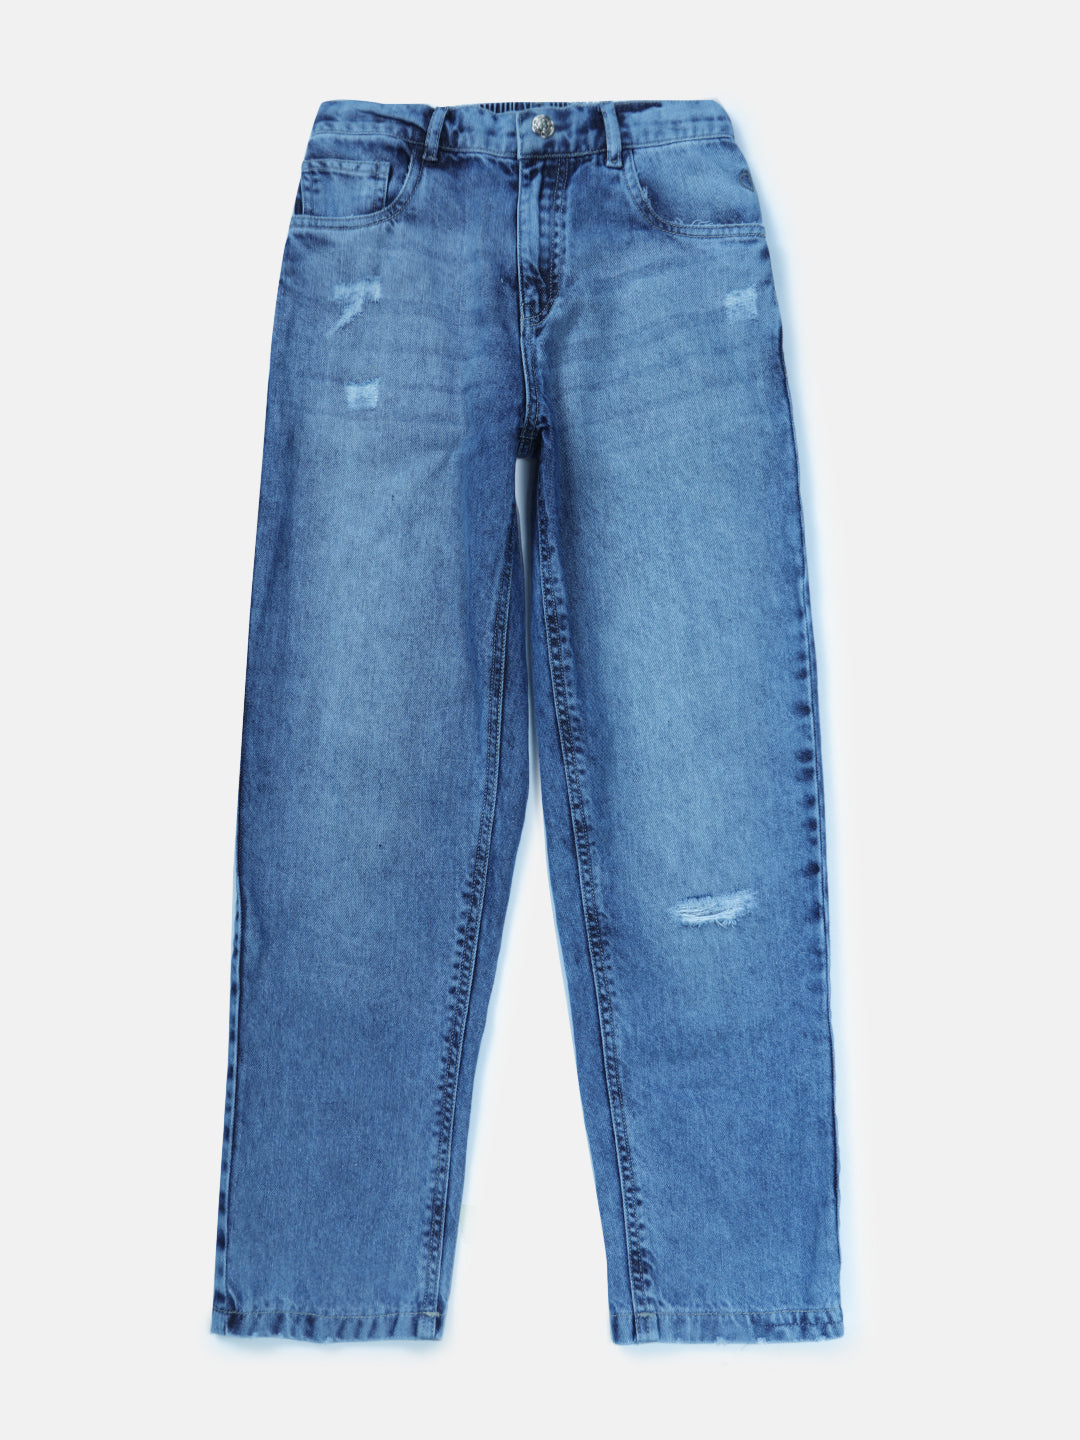 Boys Blue Cotton Washed Elasticated Jeans